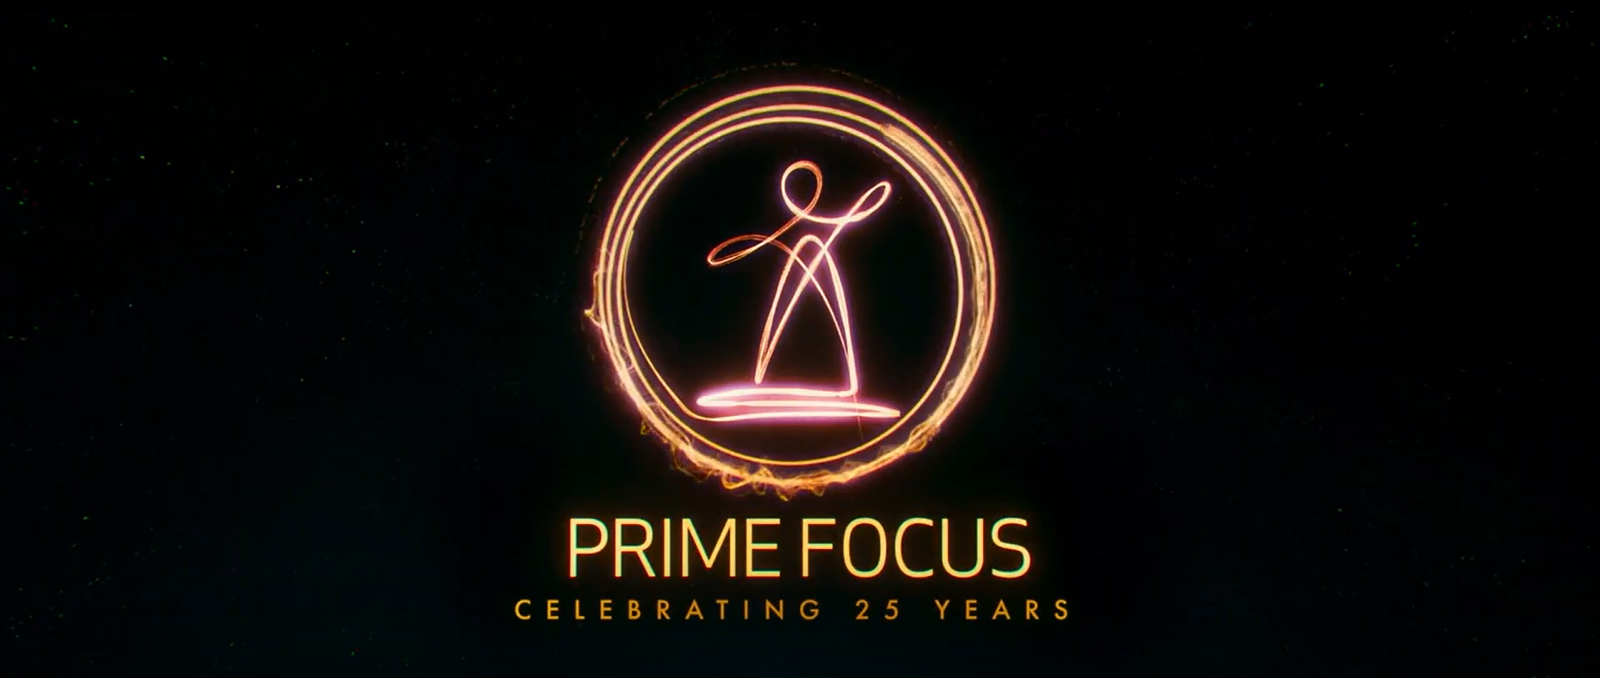 https://static.wikia.nocookie.net/jhmovie/images/1/10/Prime_Focus_Celebrating_25_Years_logo.png/revision/latest?cb=20221106151730